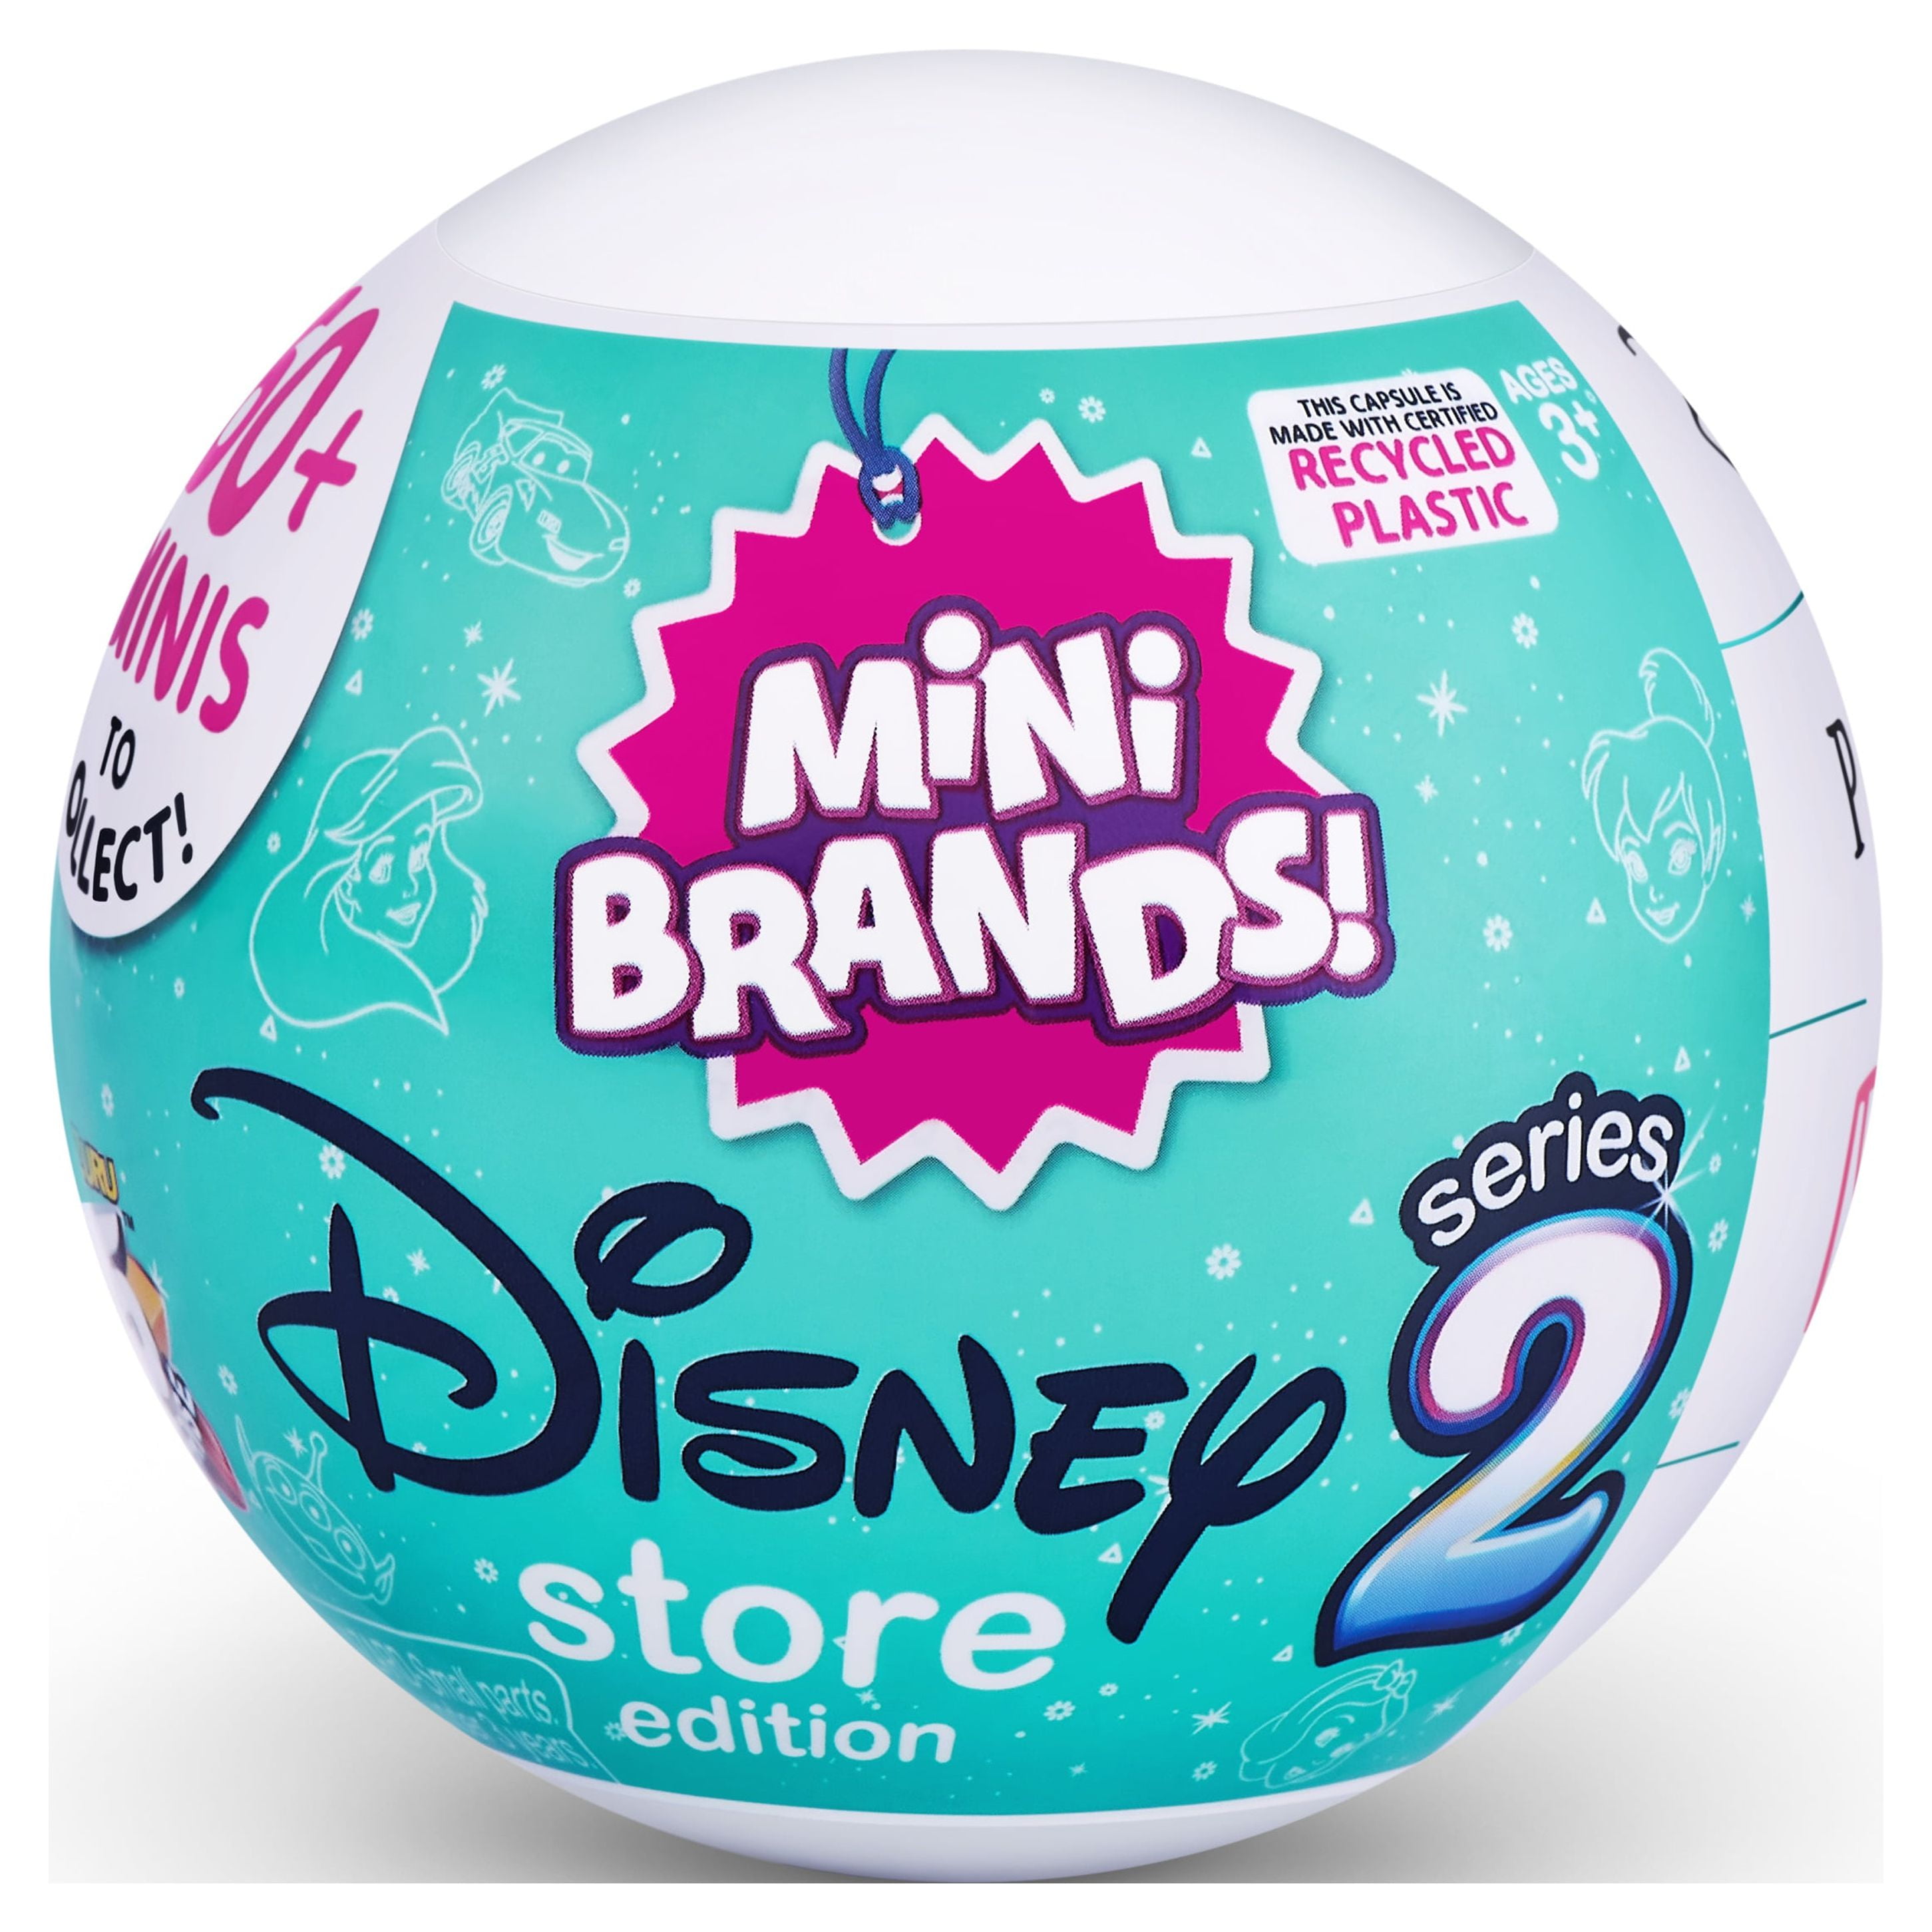 Mini Brands Disney Store Series 2 Capsule Novelty and Gag Toy by